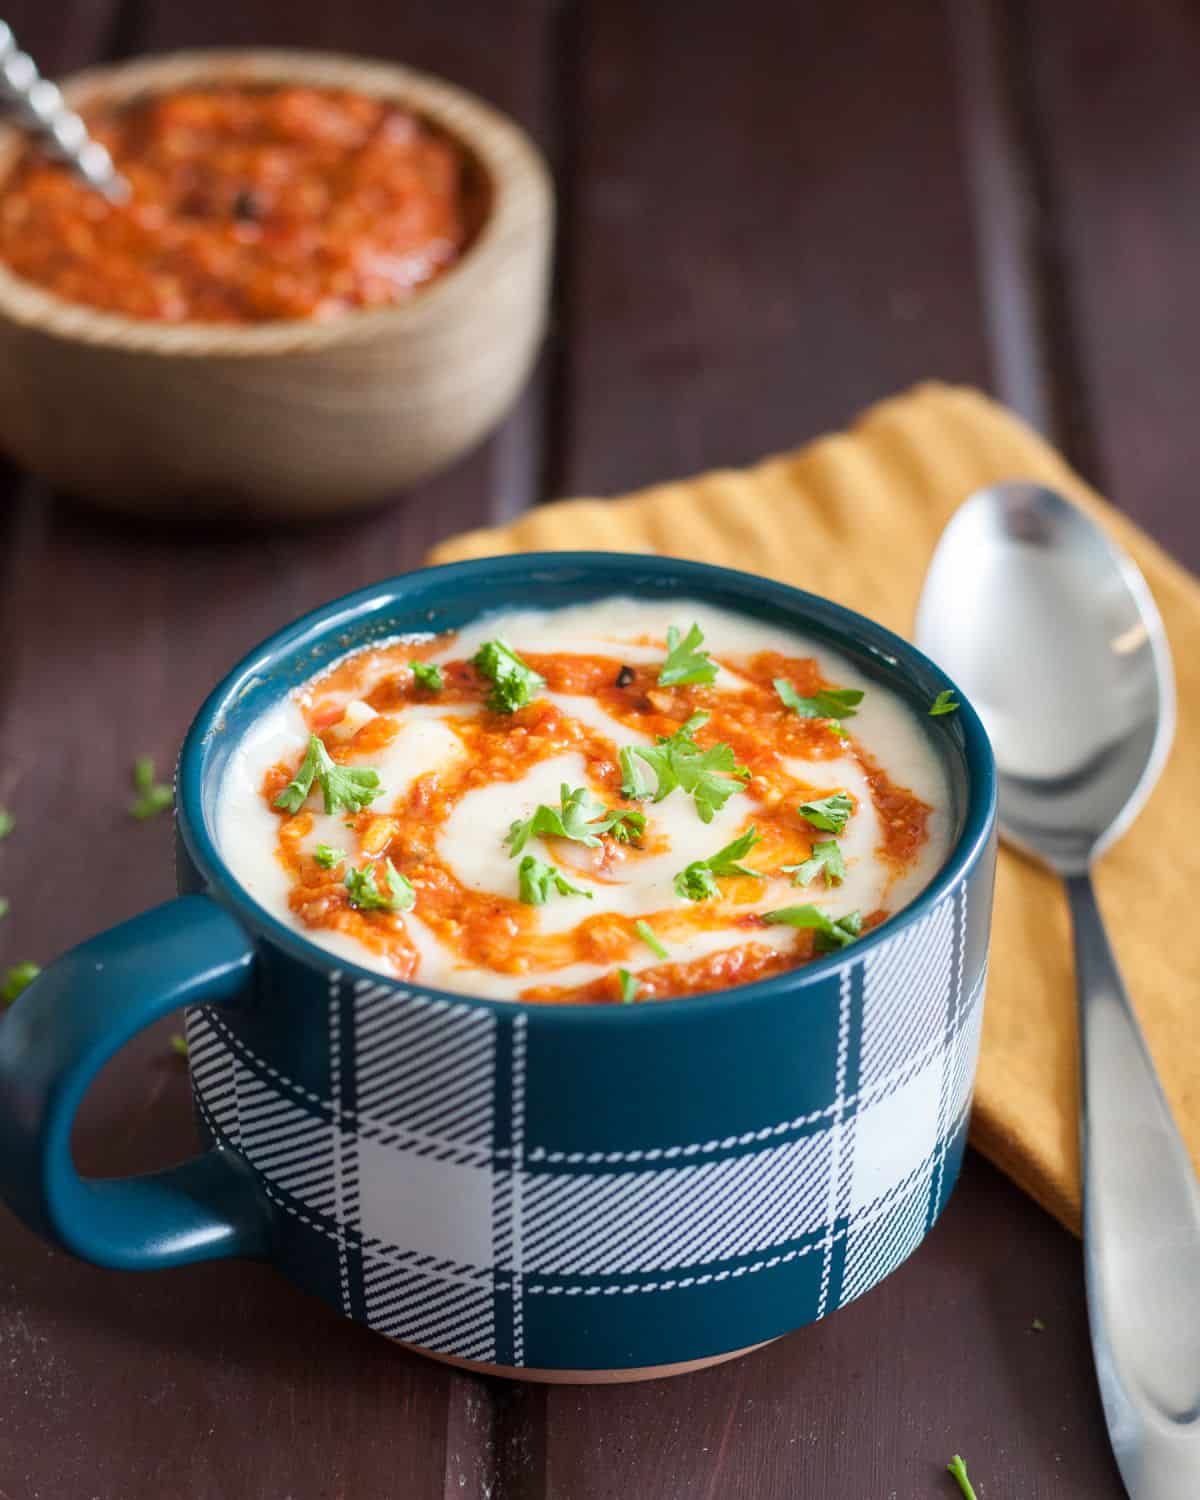 A classic potato soup recipe is extra delicious topped with romesco sauce! It's a great weeknight dinner idea, and reheats well for lunch the next day. Recipe on GoodieGodmother.com